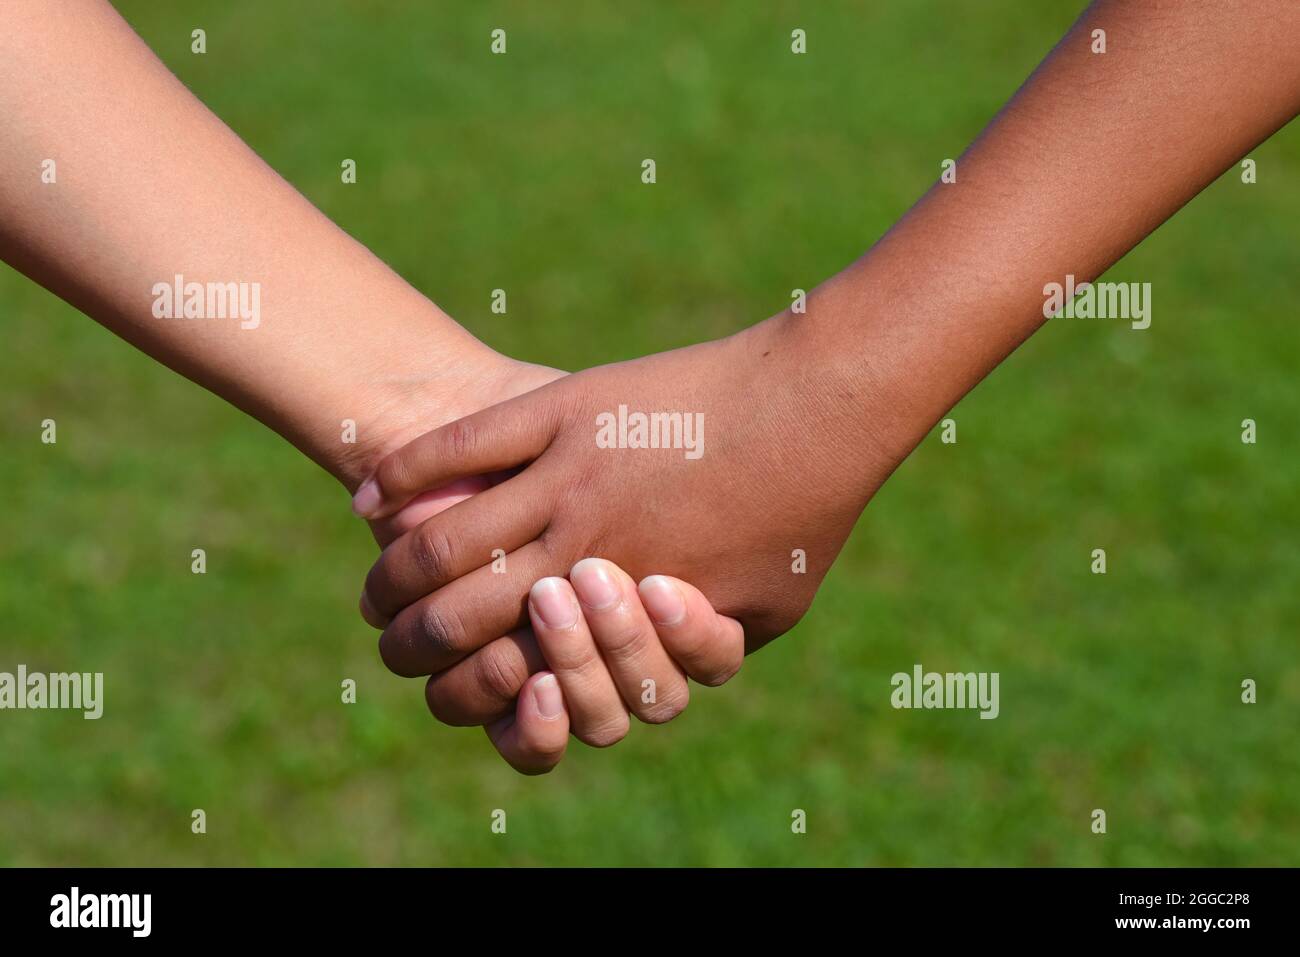 Hands holding each other Stock Photo